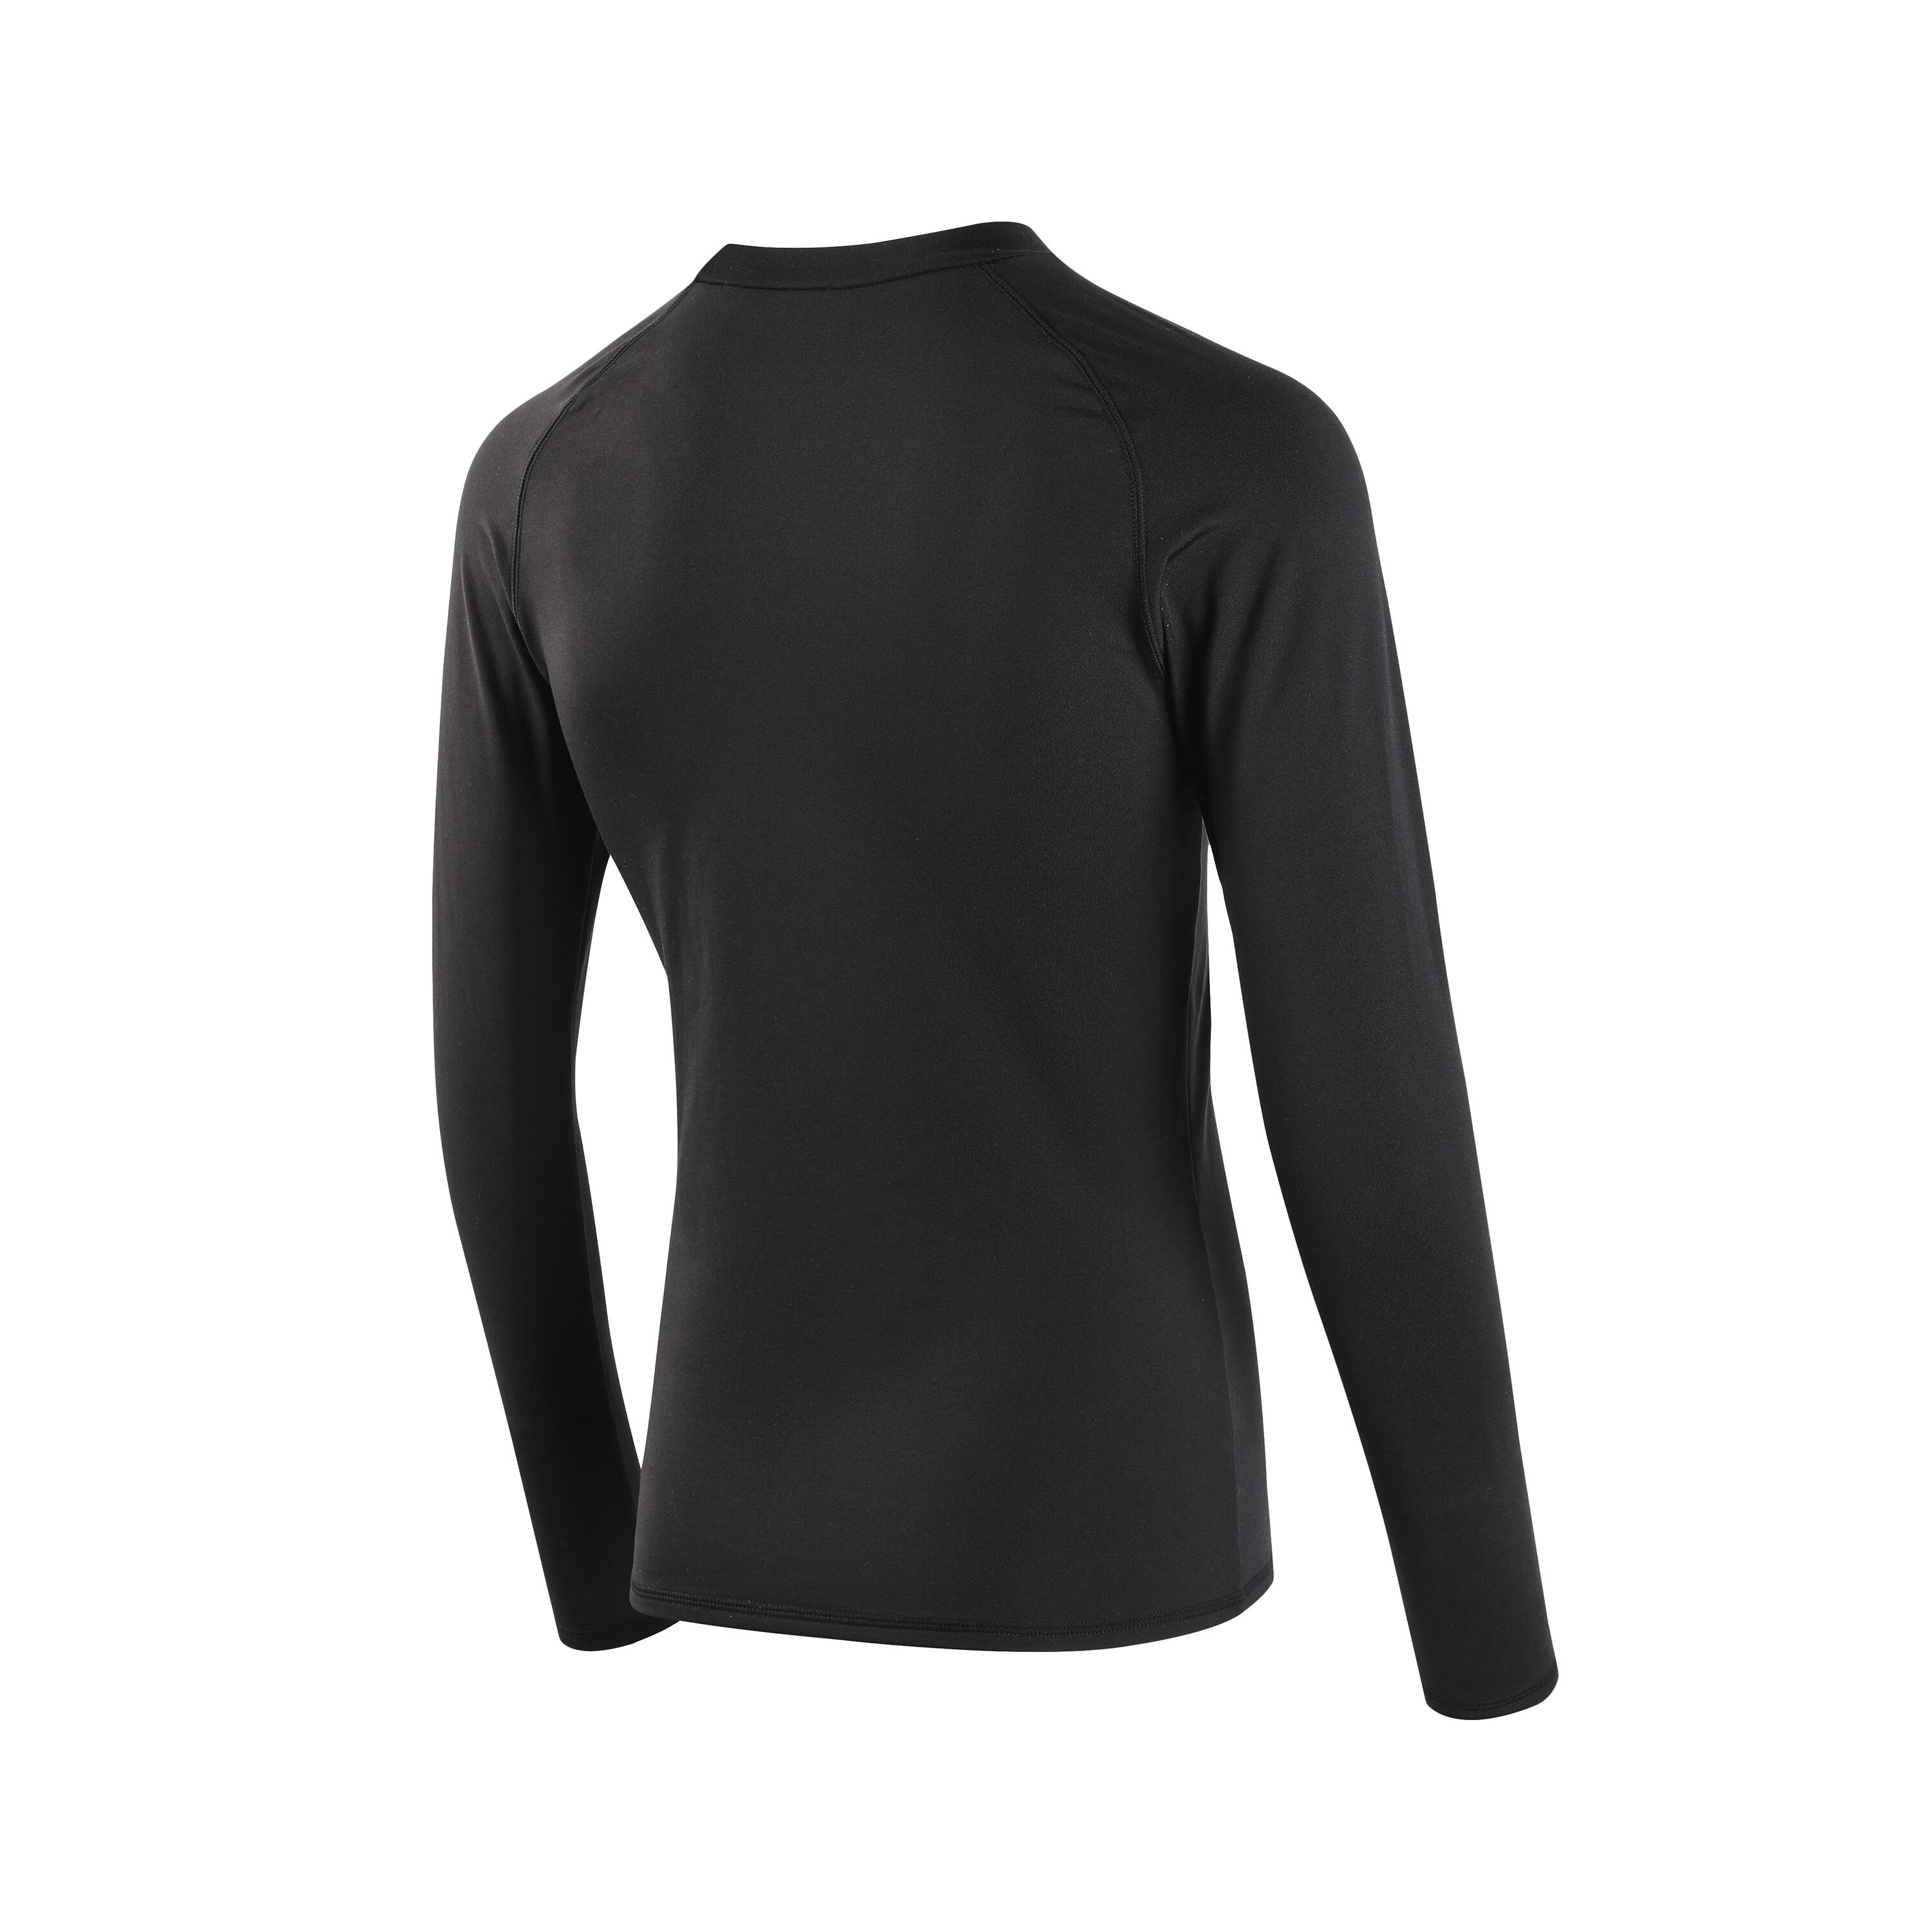 Men's Black Thermal Cycling Jersey, Cool/Cold Weather